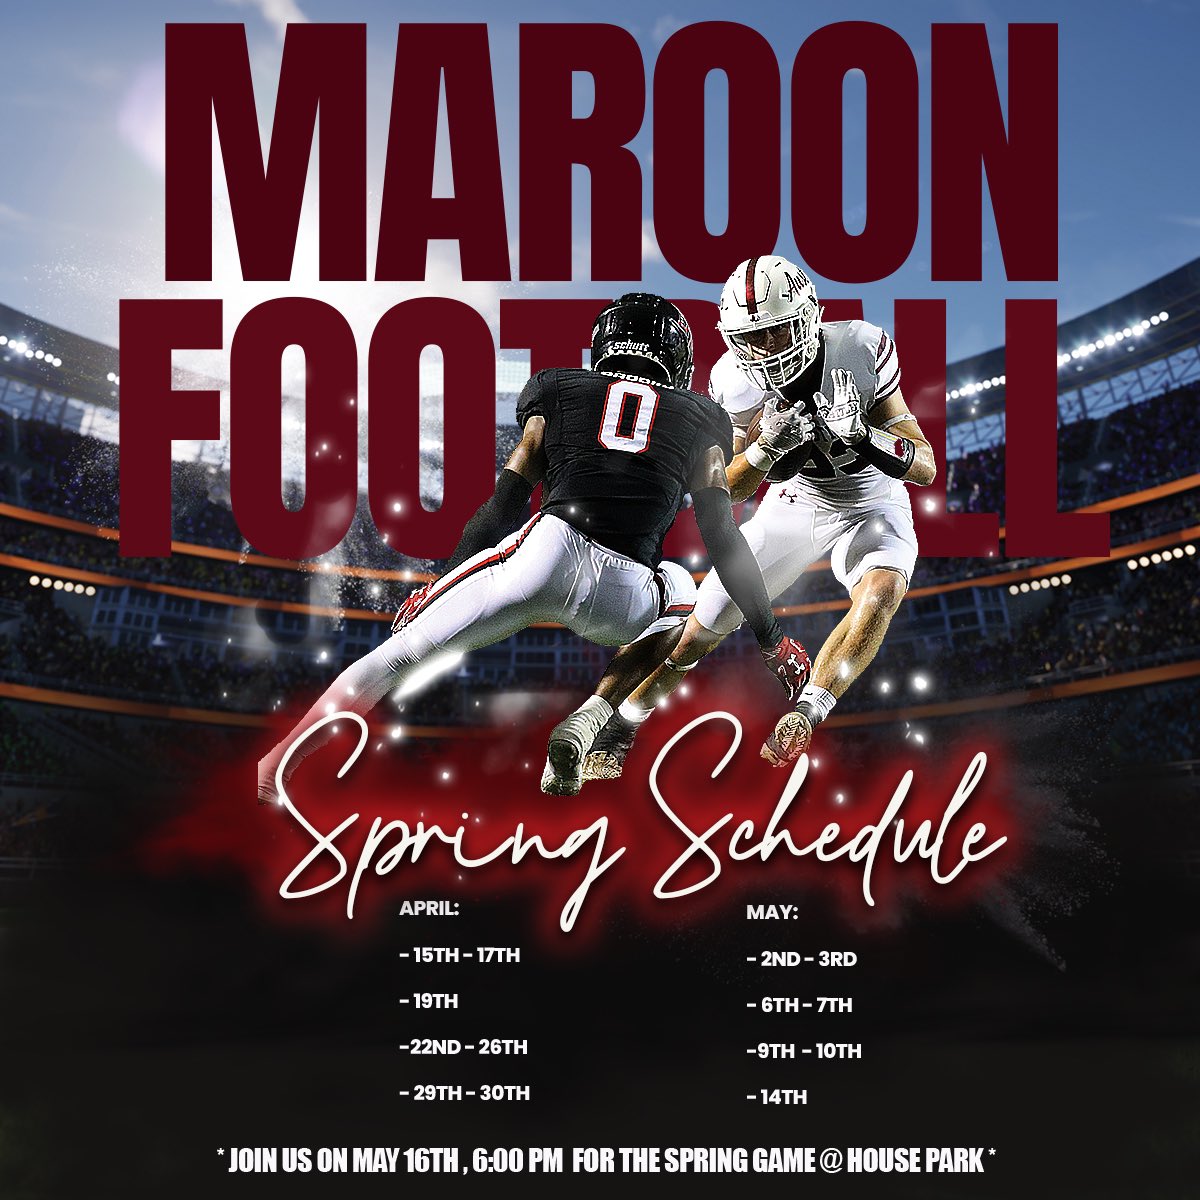 Maroon football fans - mark your calendars and join us in May for the Spring game at House Park!